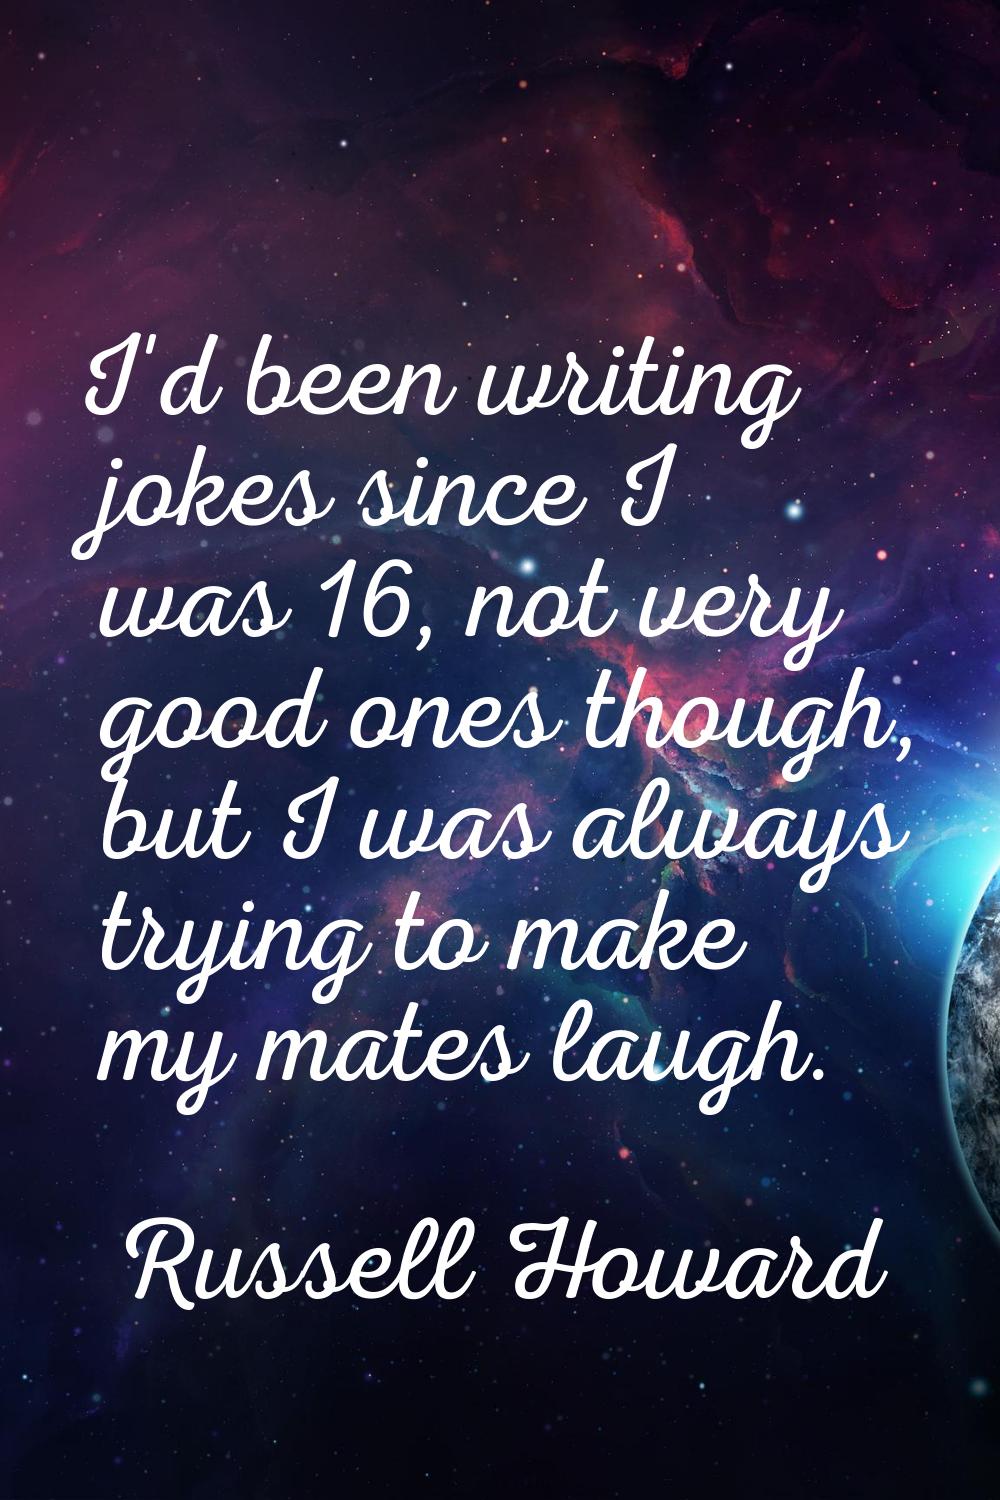 I'd been writing jokes since I was 16, not very good ones though, but I was always trying to make m